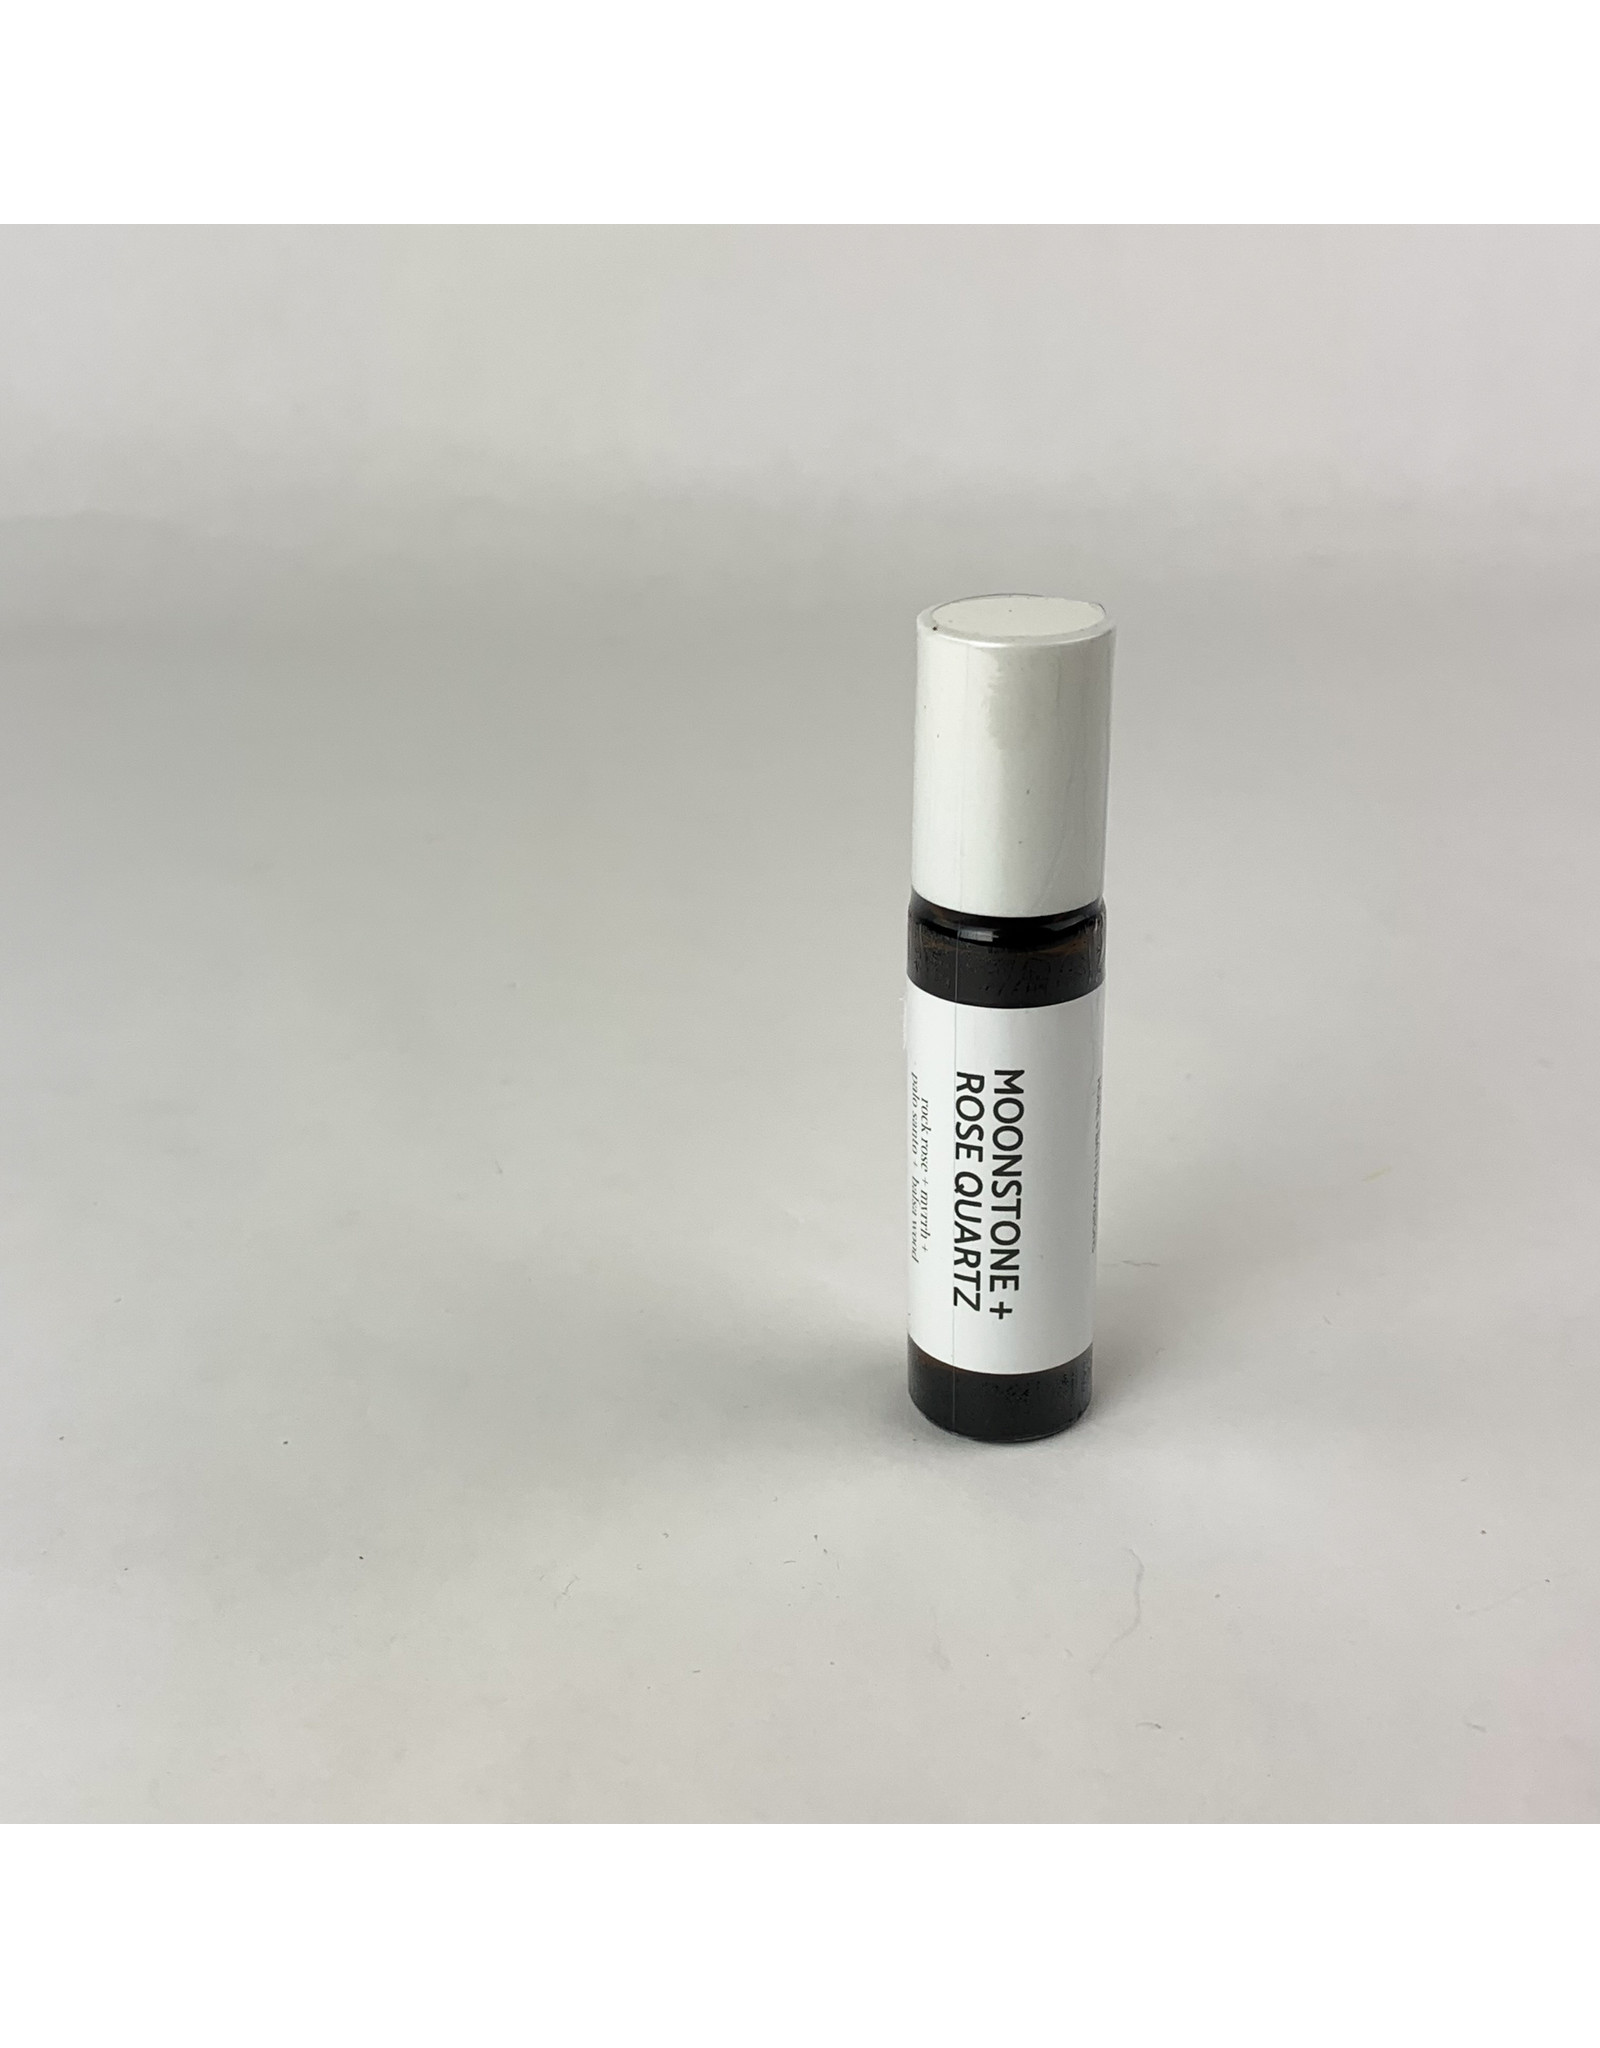 Modern Makers Home and Bath Moonstone Roll On Perfume Oil